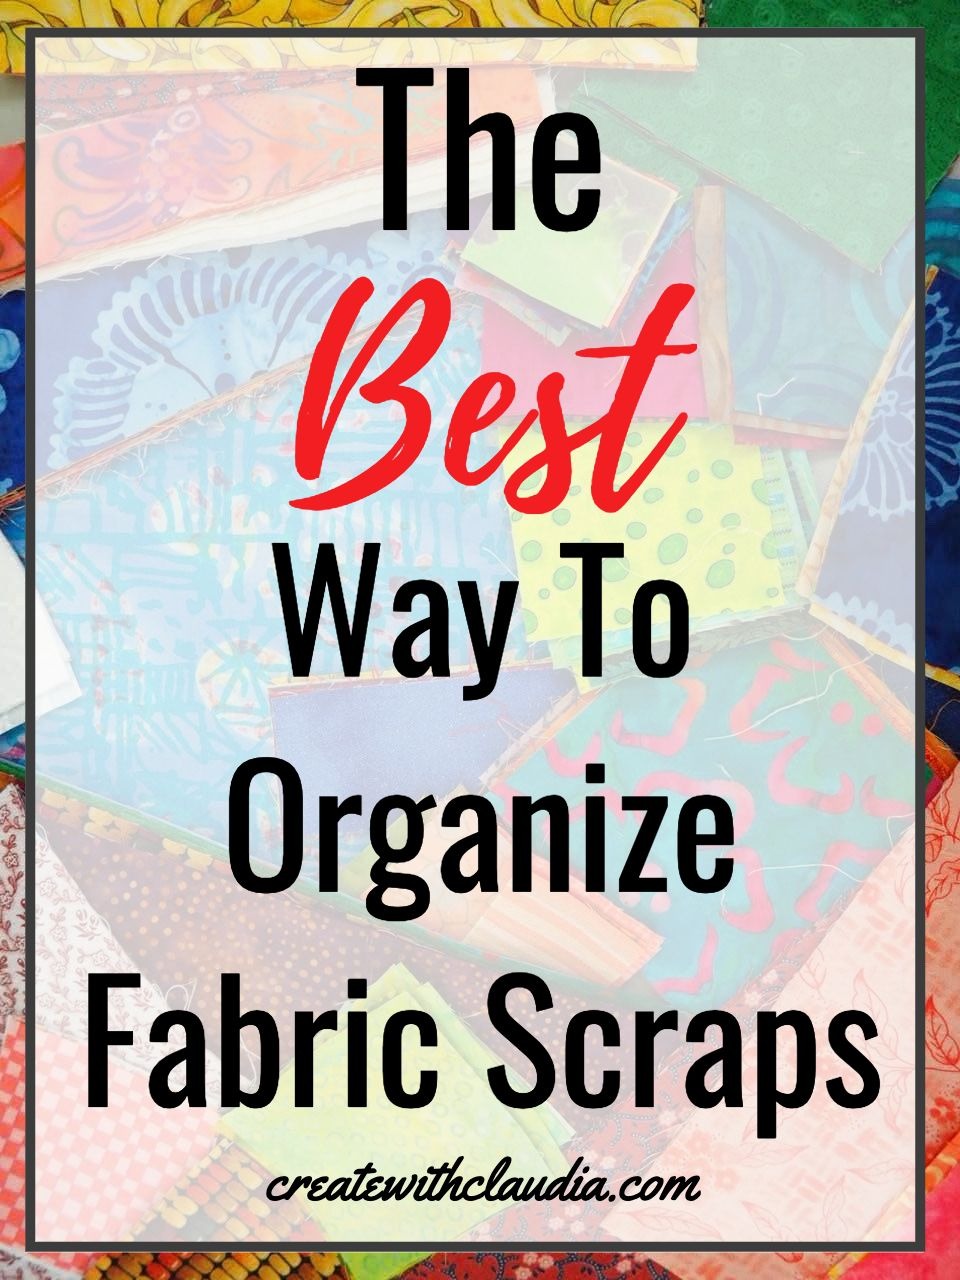 How to Quilt With Tiny Fabric Scraps: Our Top 3 Methods